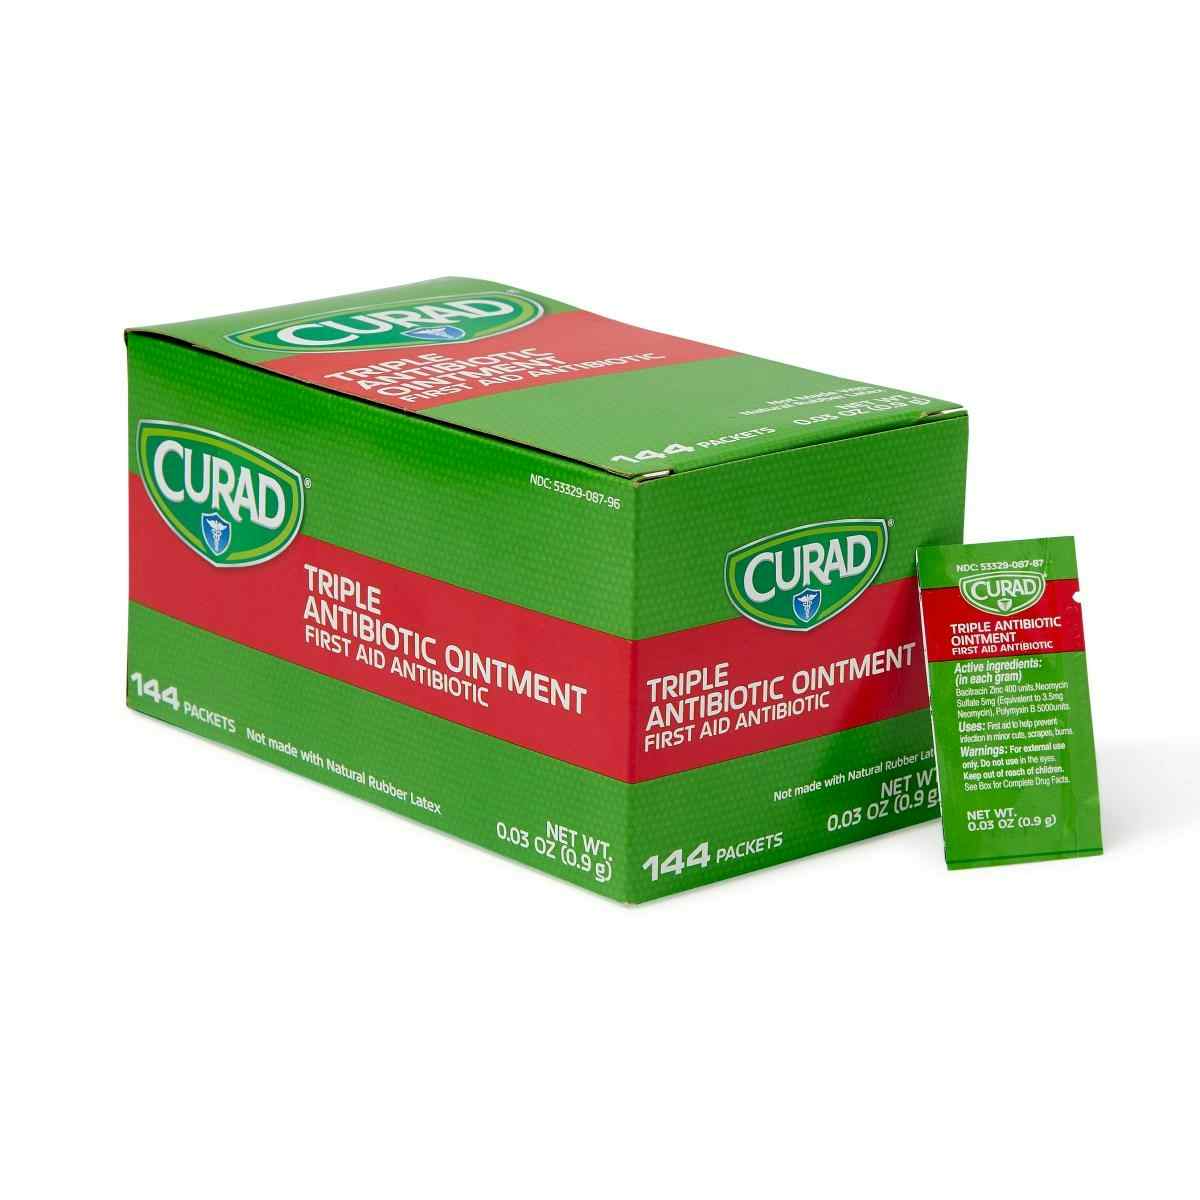 Curad Triple Antibiotic Ointment, CUR001209, 0.9 g Packets - Case of 1728